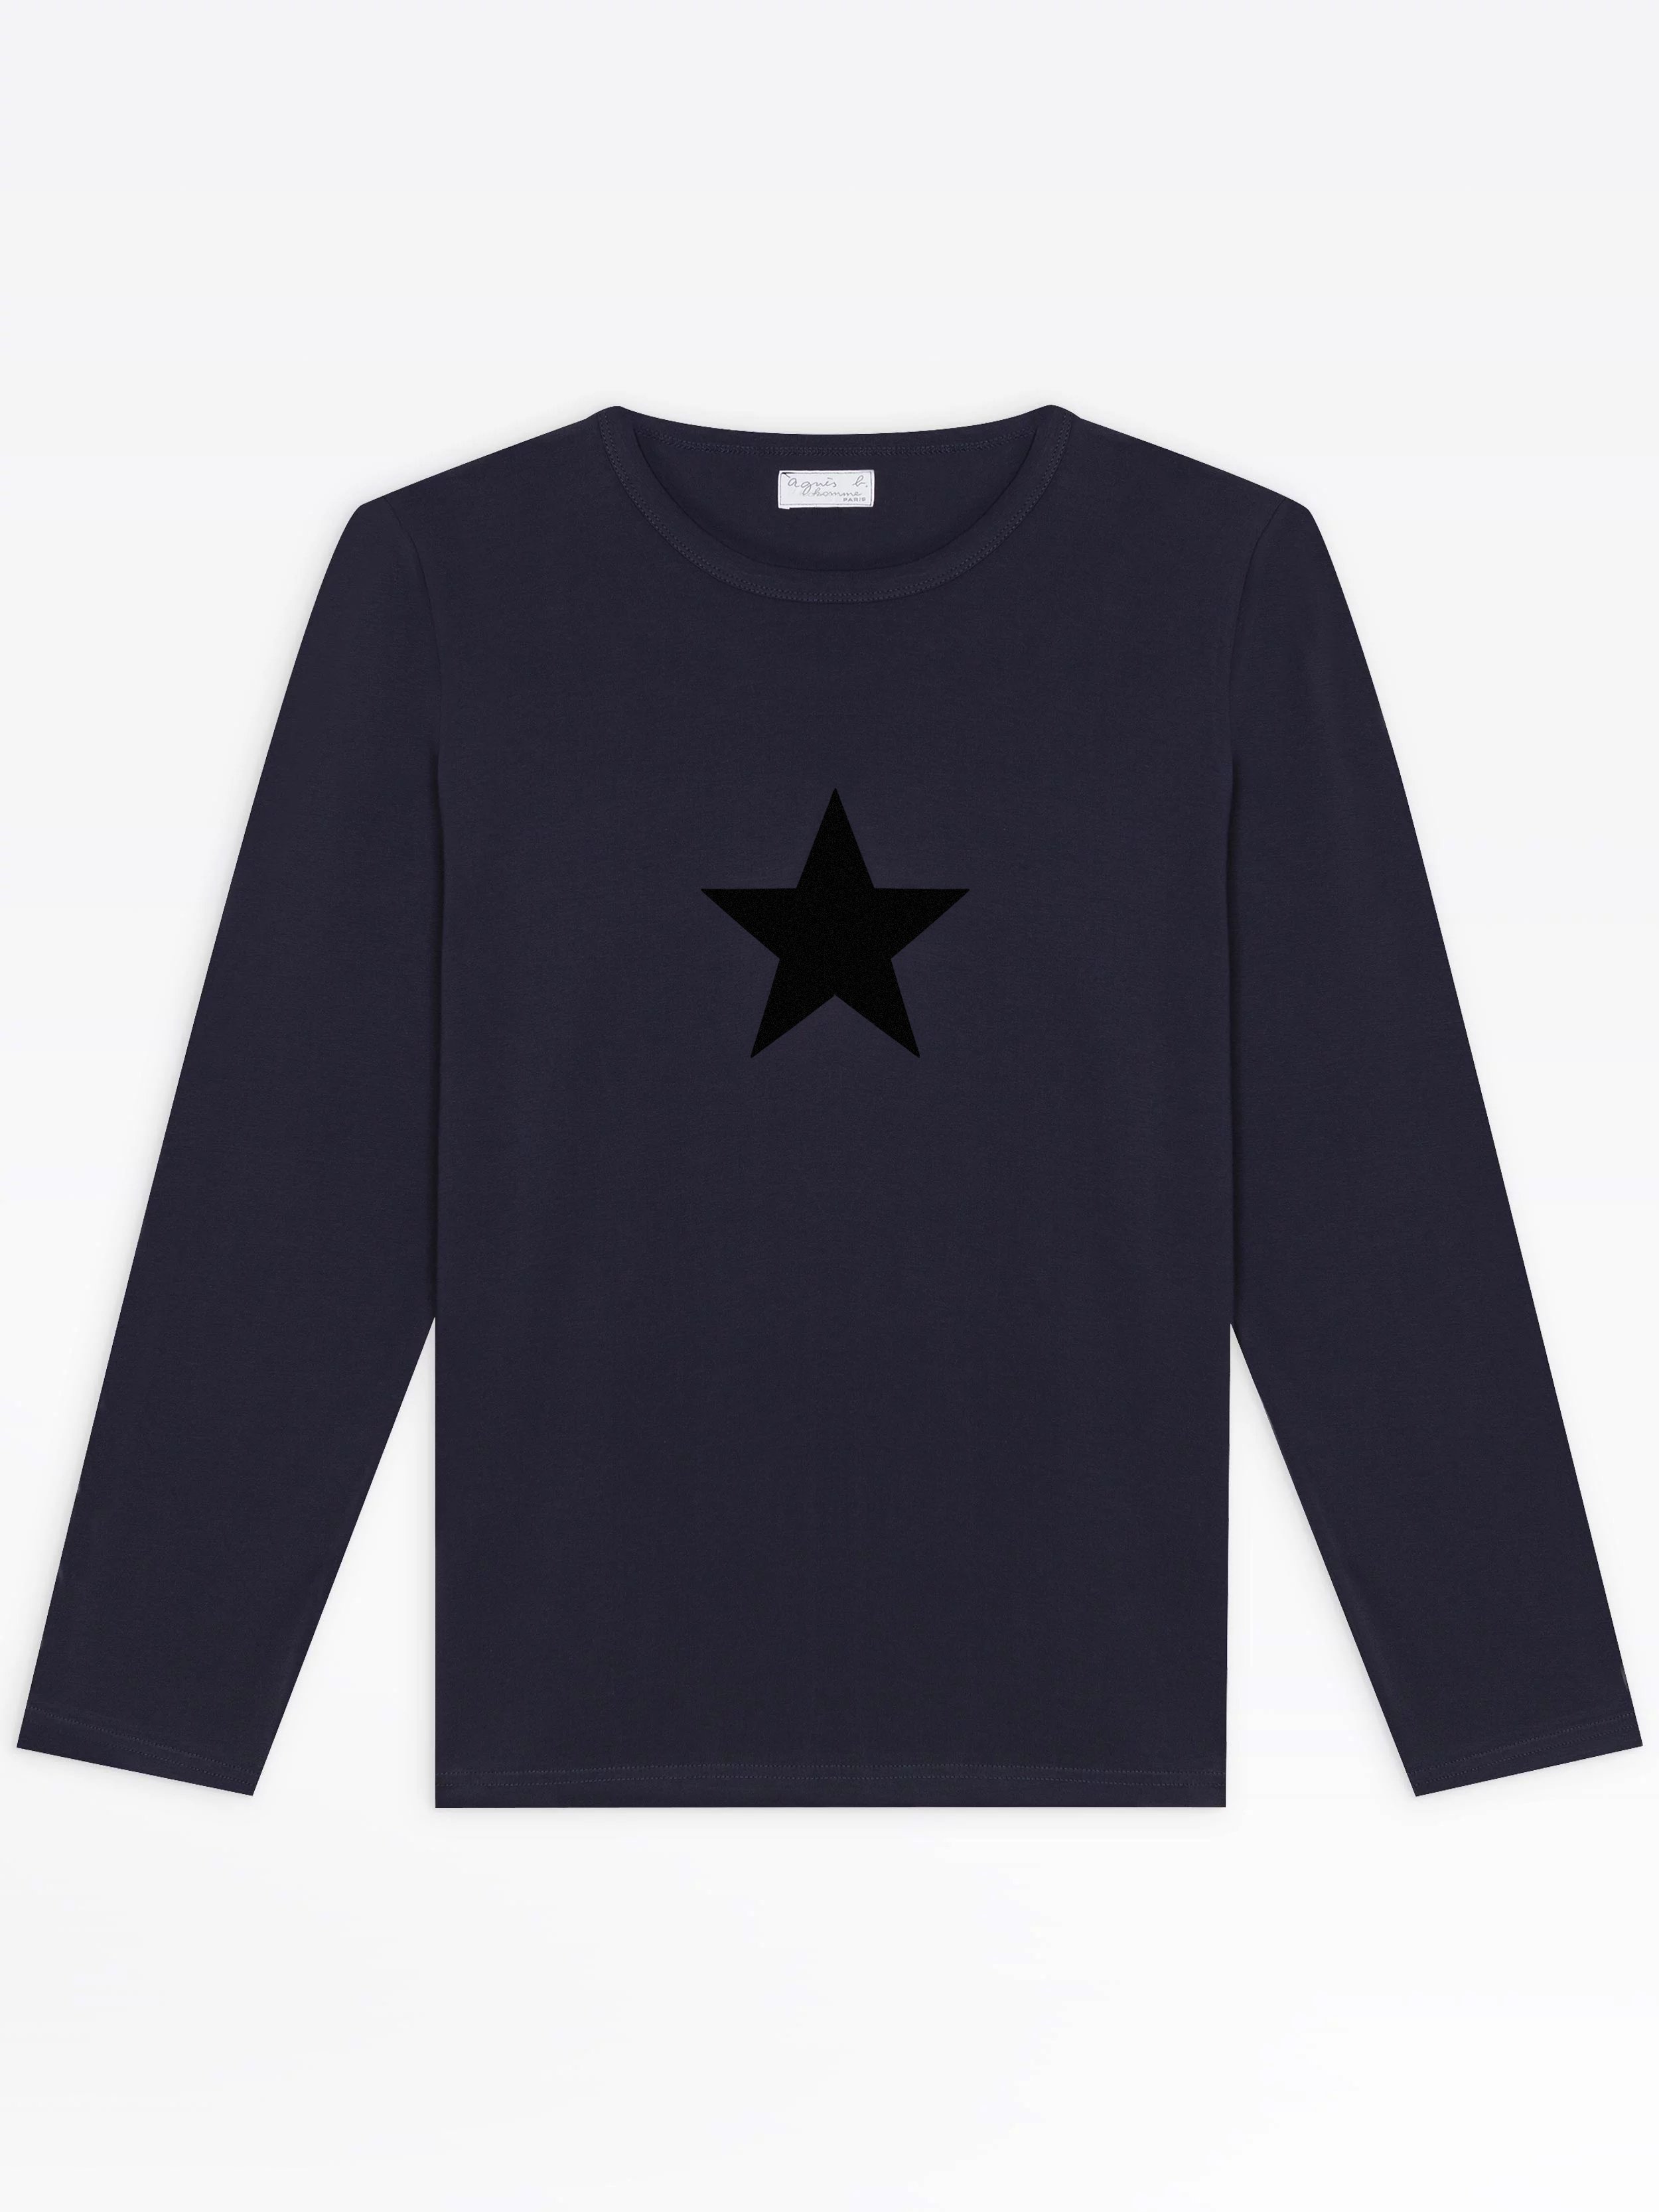 long sleeves coulos star t-shirt